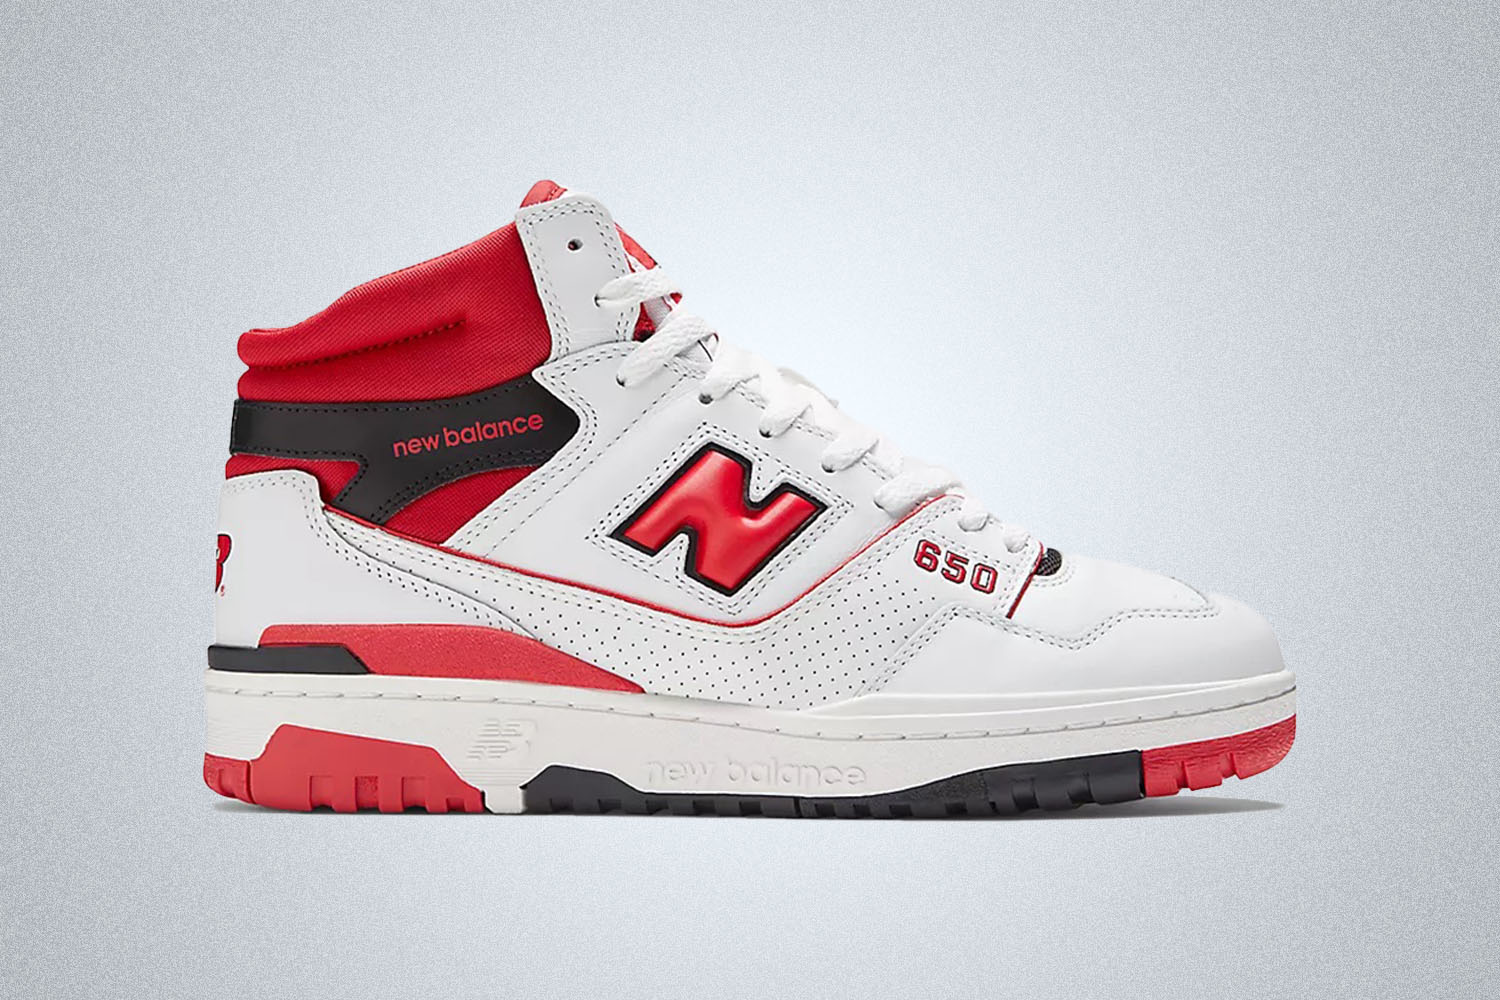 a pair of red and white NB basketball shoes on a grey background